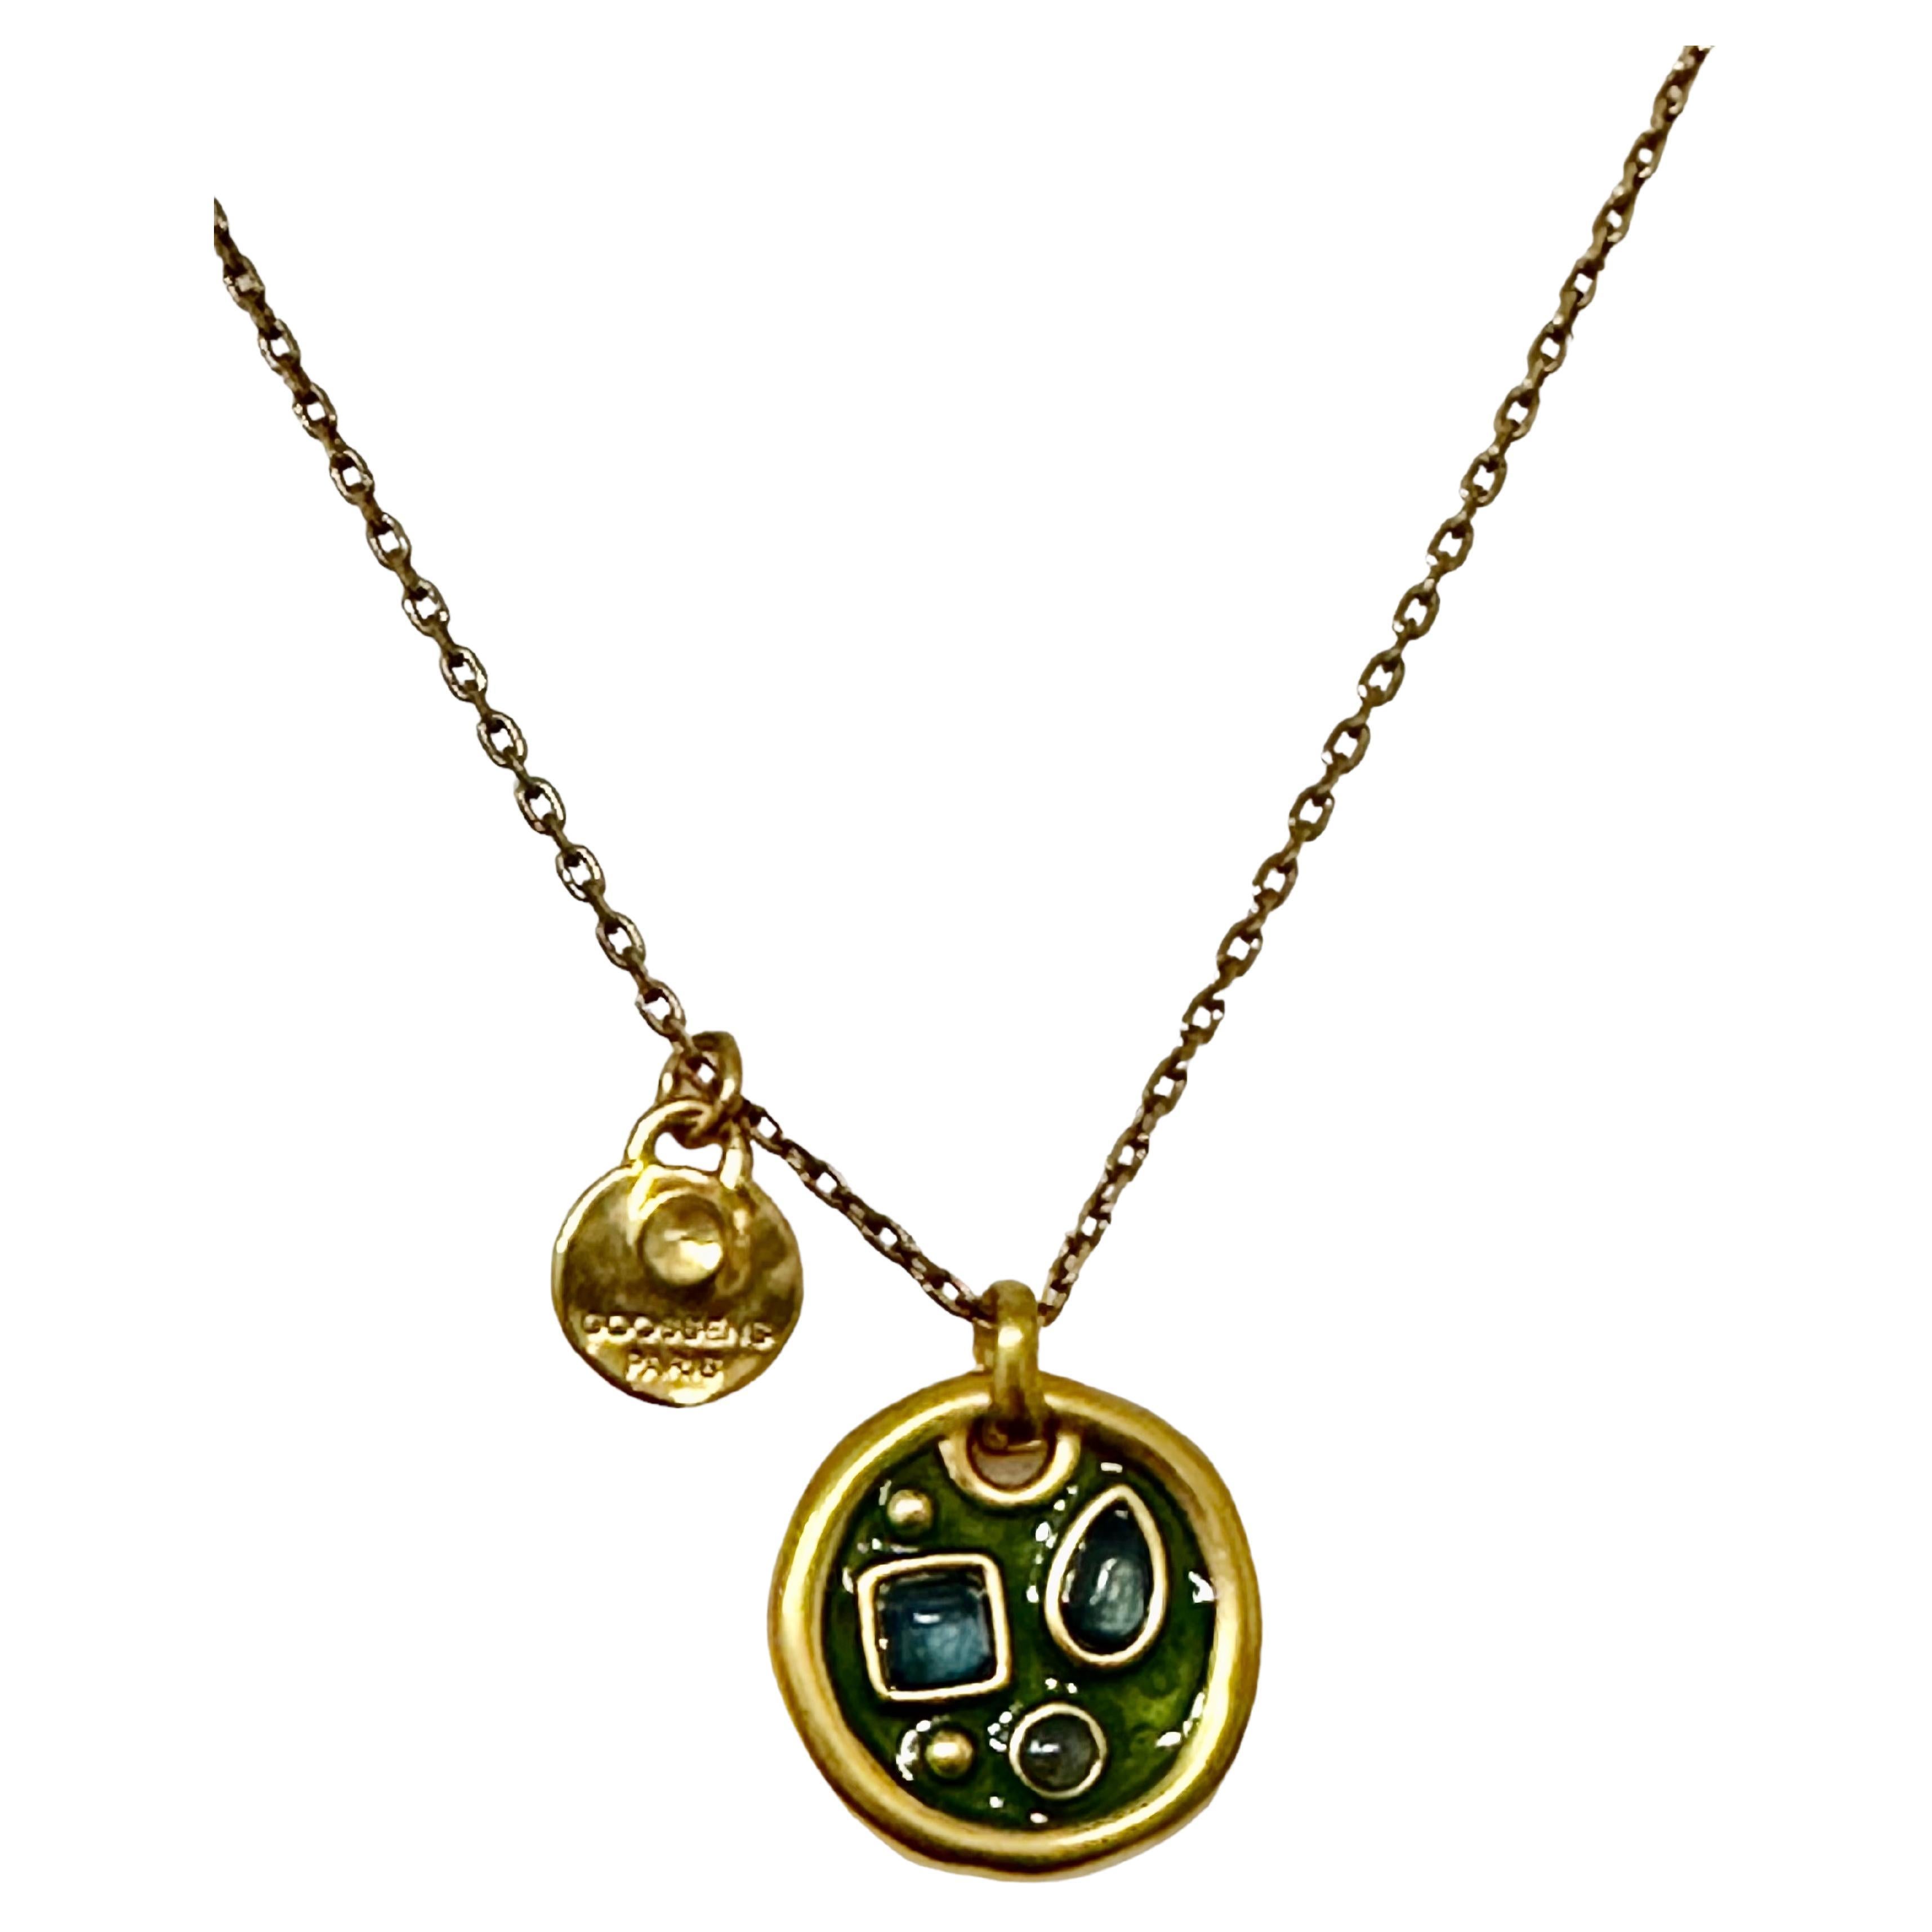 New at the House of Goossens. Pendant necklace from the Boucle Cocktail Collection, revealing a jewel in relief punctuated with rock crystal beads on a patinated enamel. Yellow gold finish. Colour Bicolor Bottle Green

Adjustment chain 2”
Medal